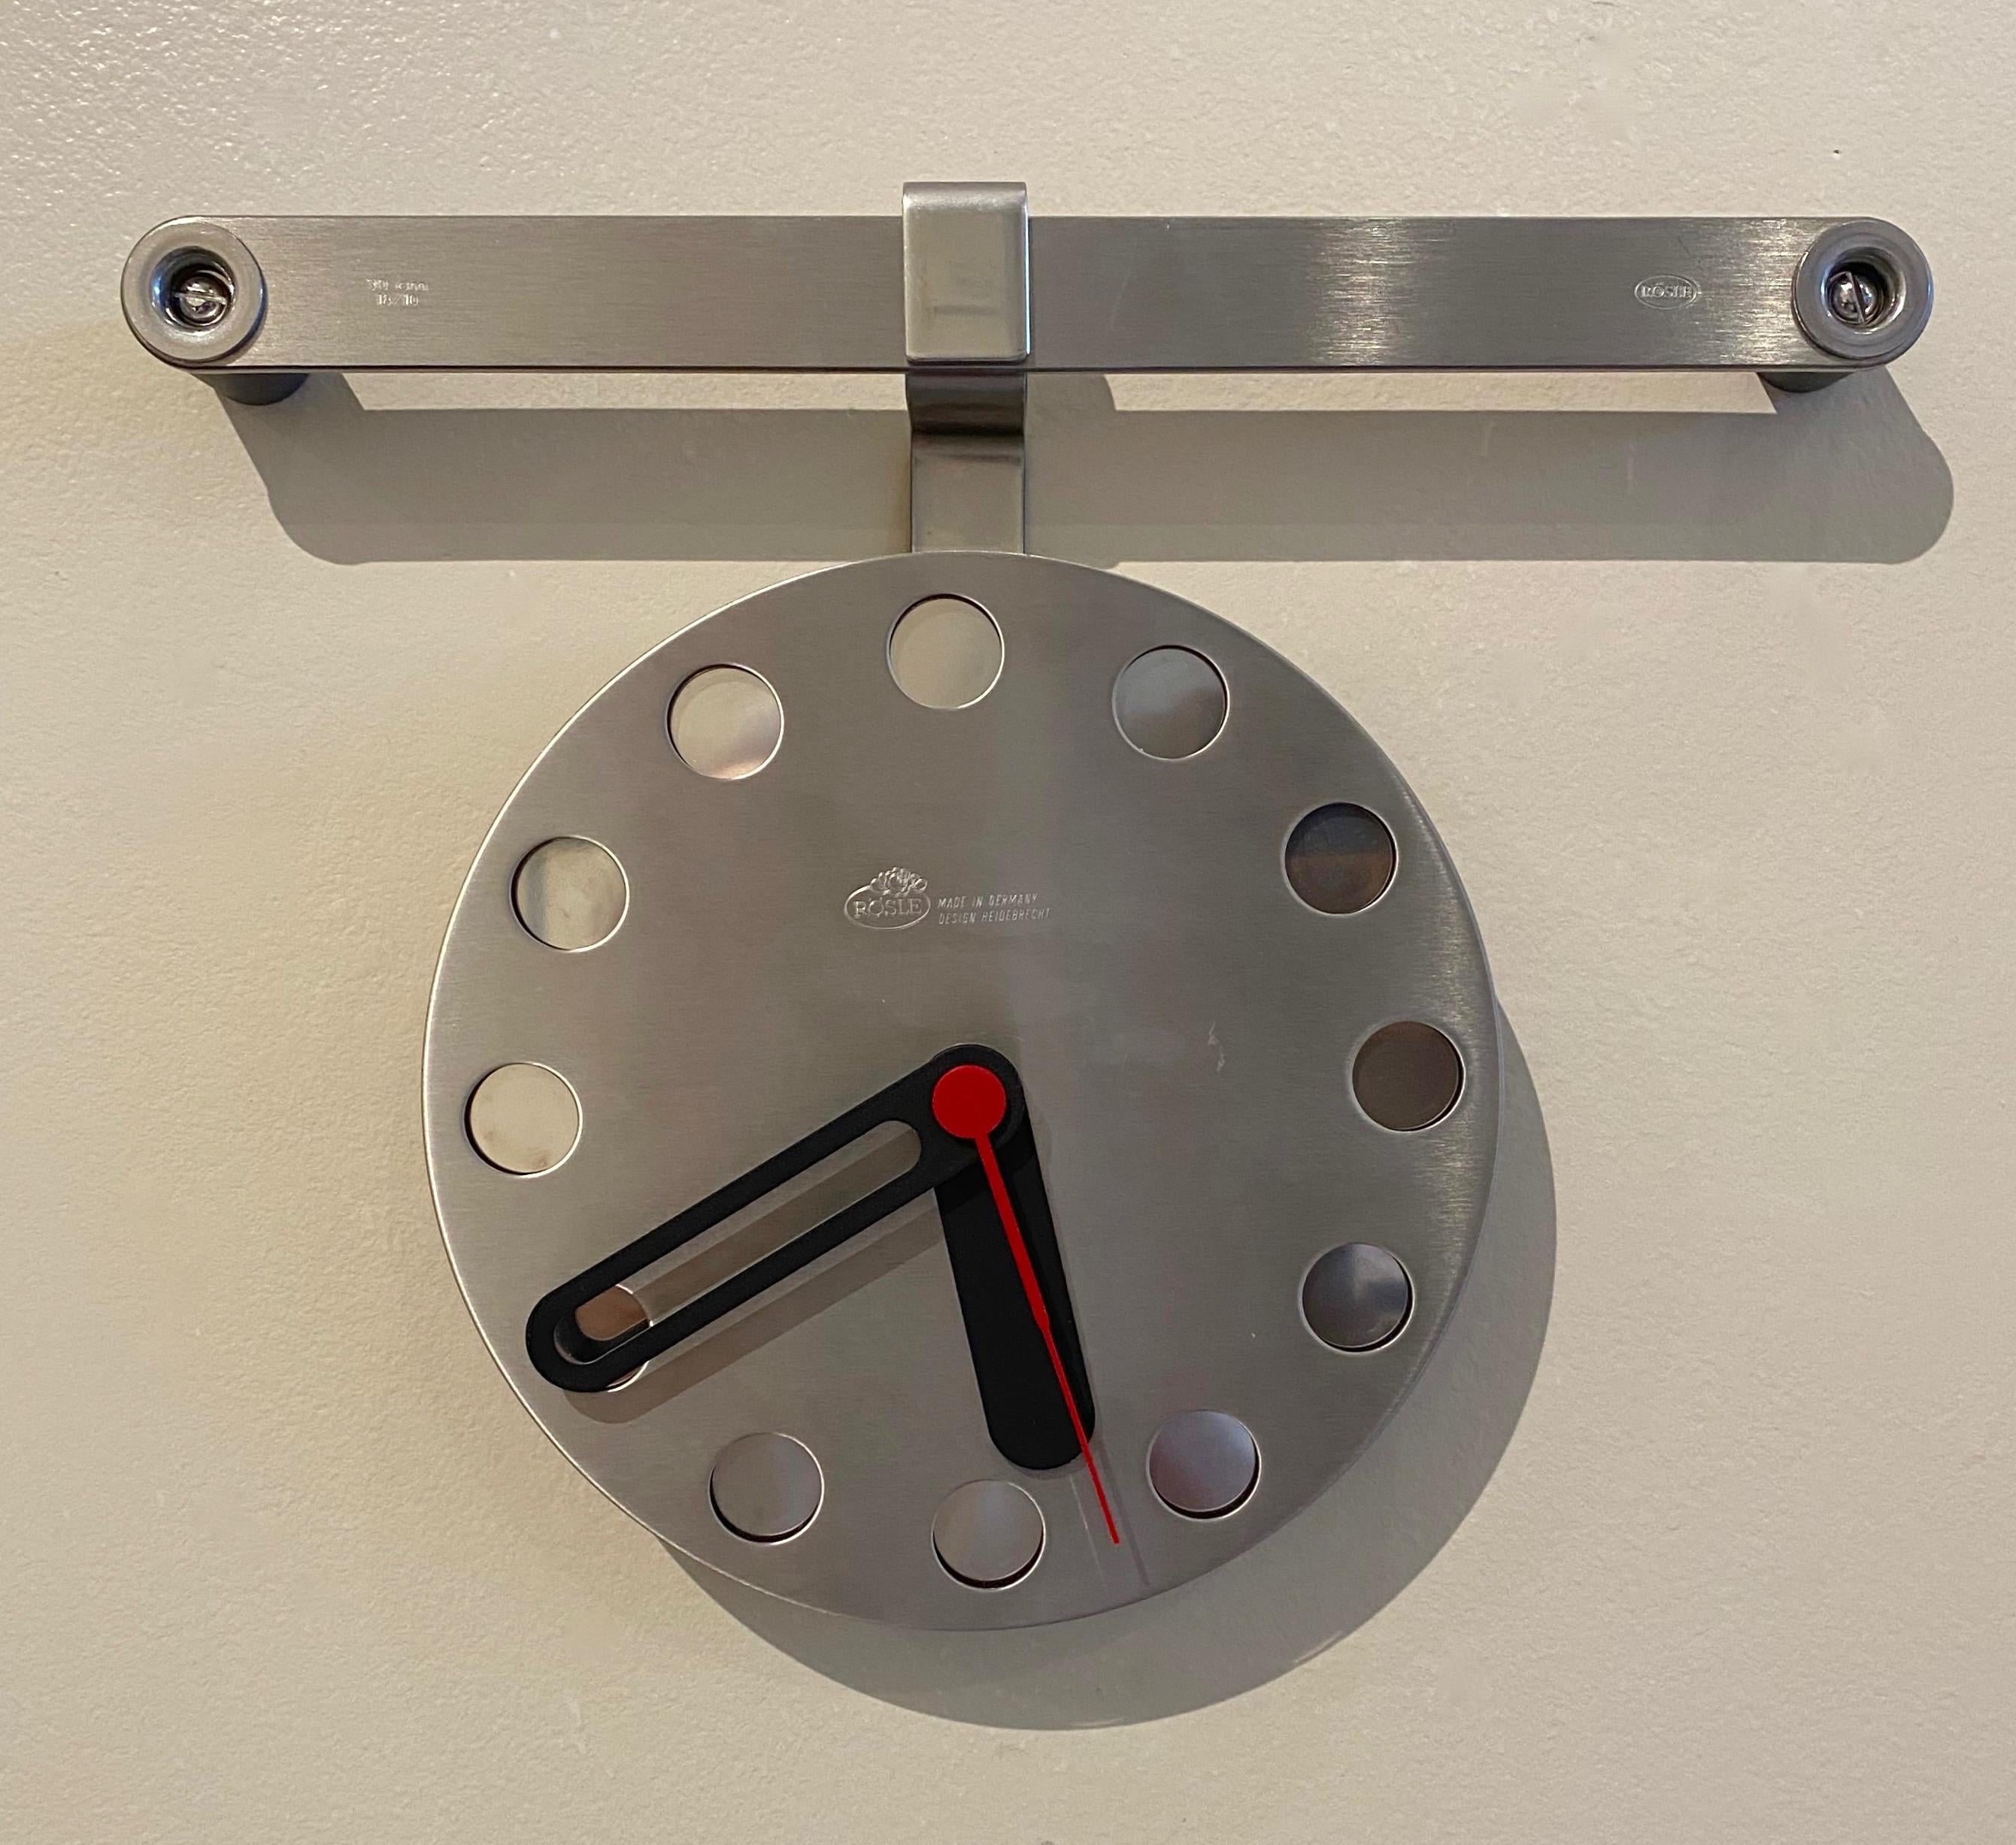 Modern Rosle Stainless Steel Wall Clock from Germany, Circa 1990s